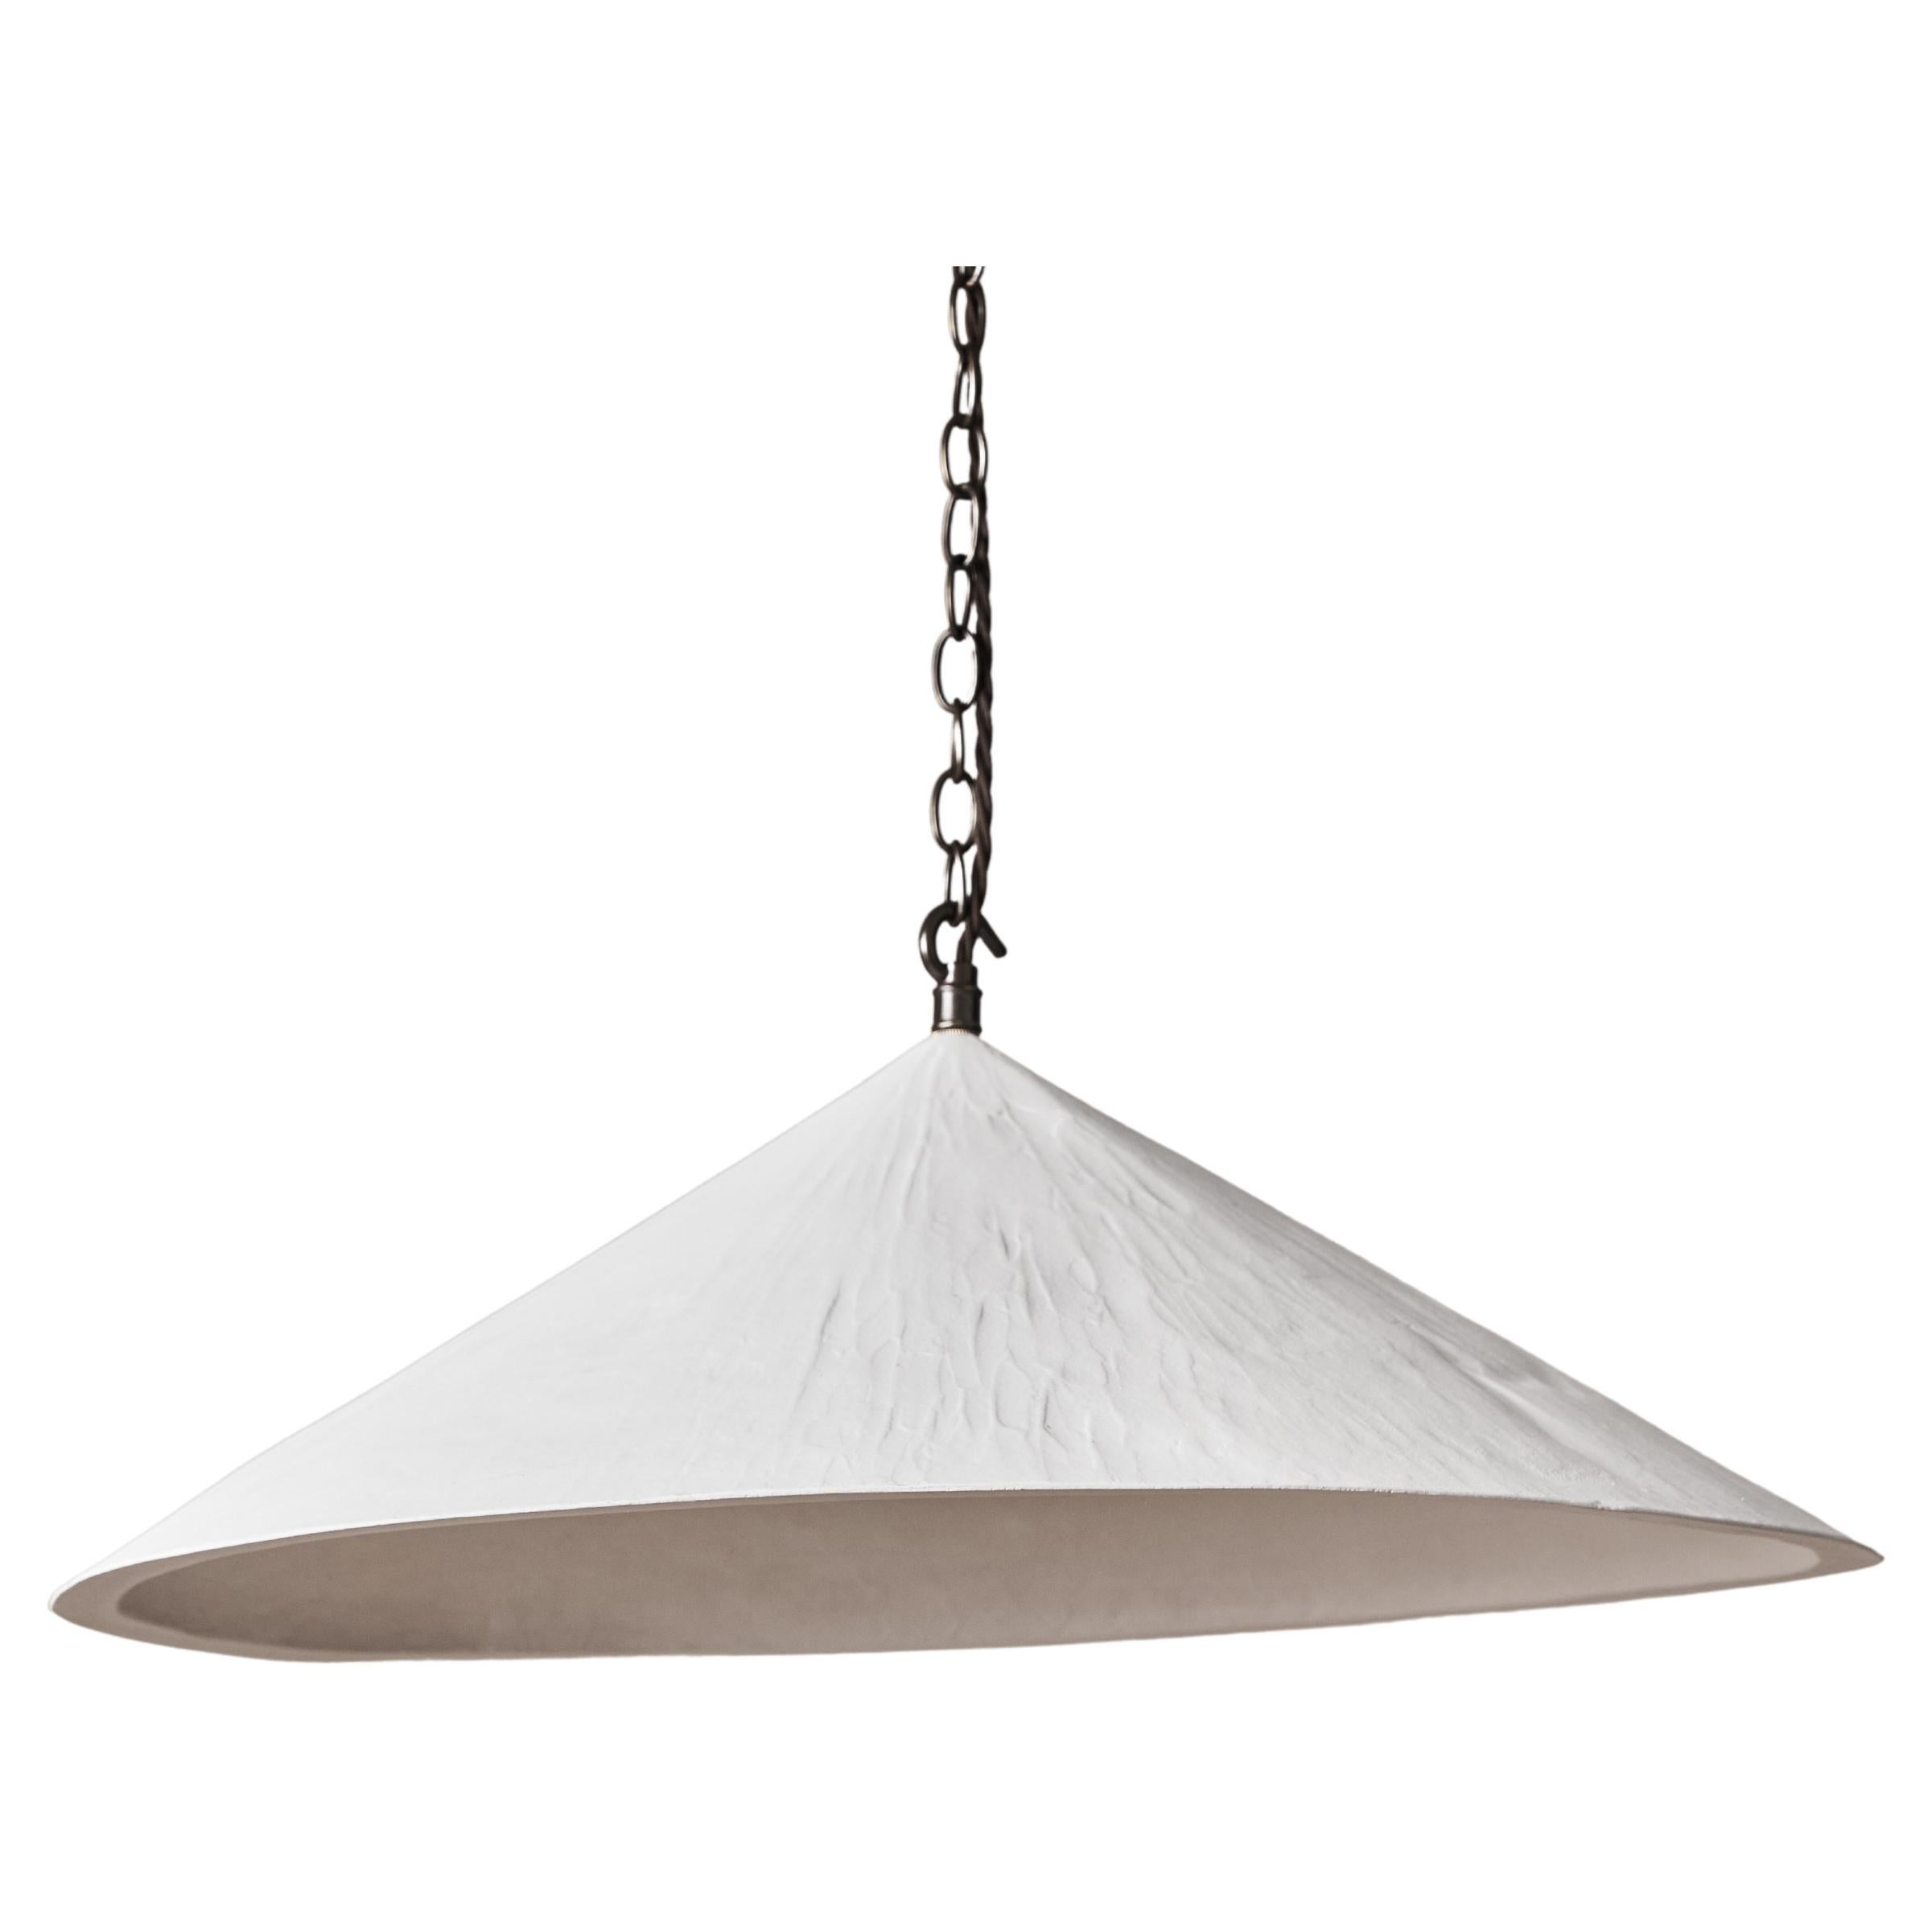 Small Wobble Ceiling Light by Alex Robinson